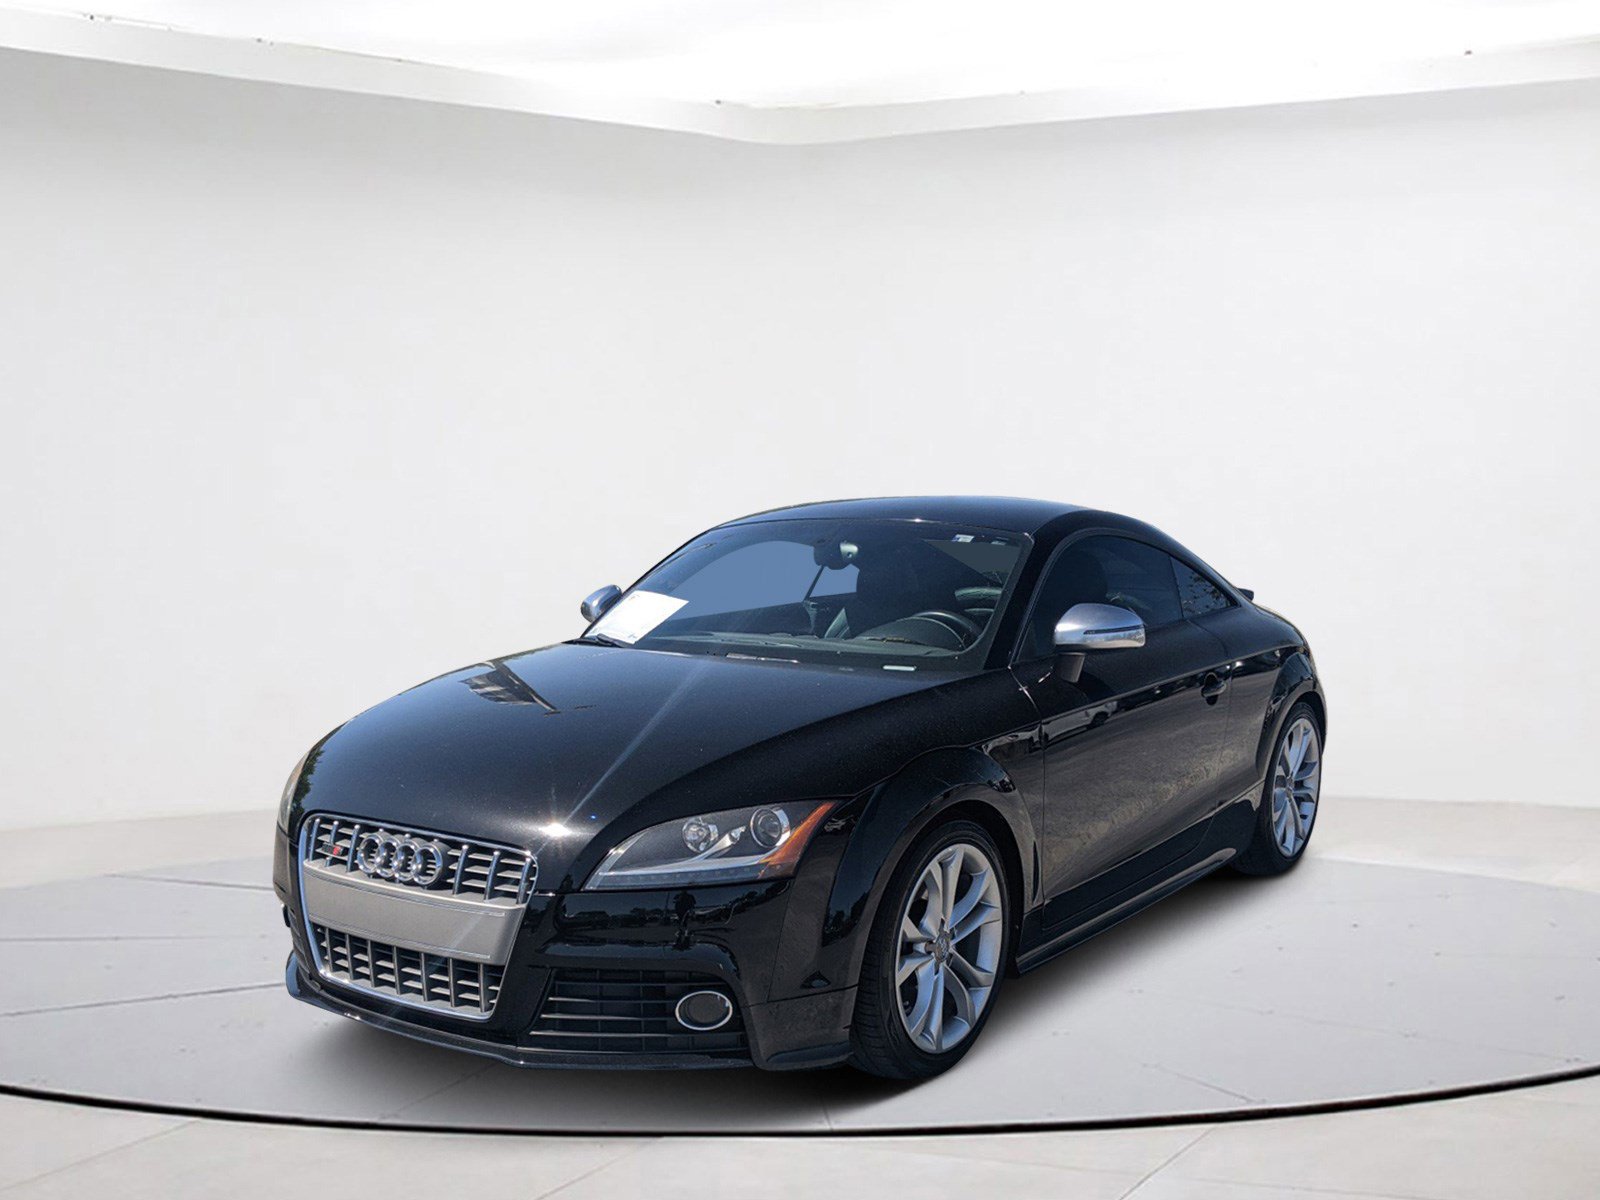 Used Audi TTS for Sale Right Now - Autotrader